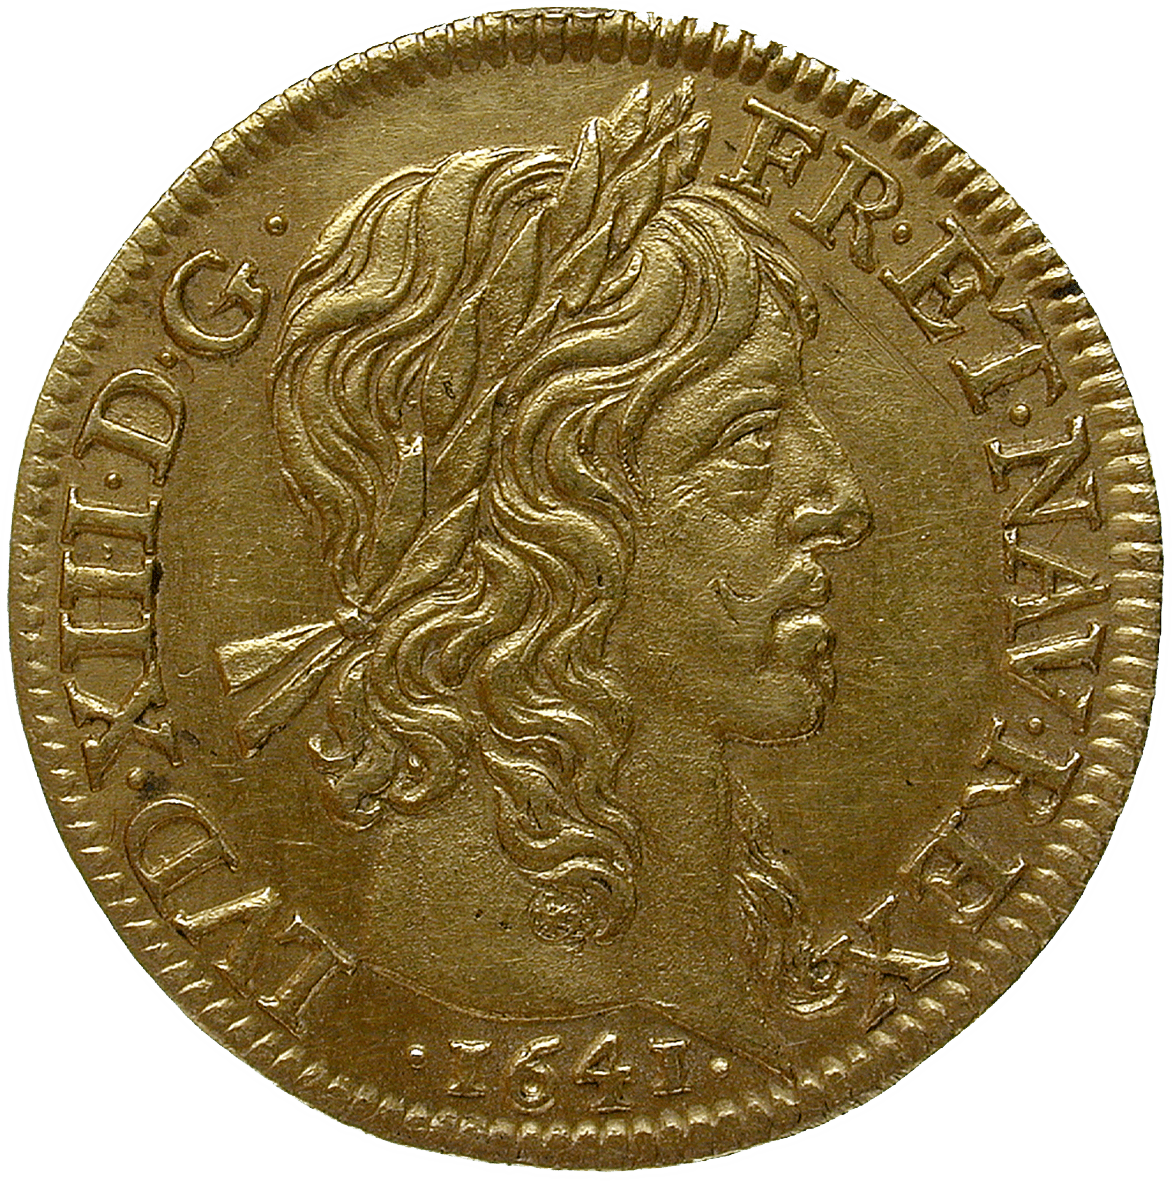 Kingdom of France, Louis XIII, Louis d'or 1641 (obverse)